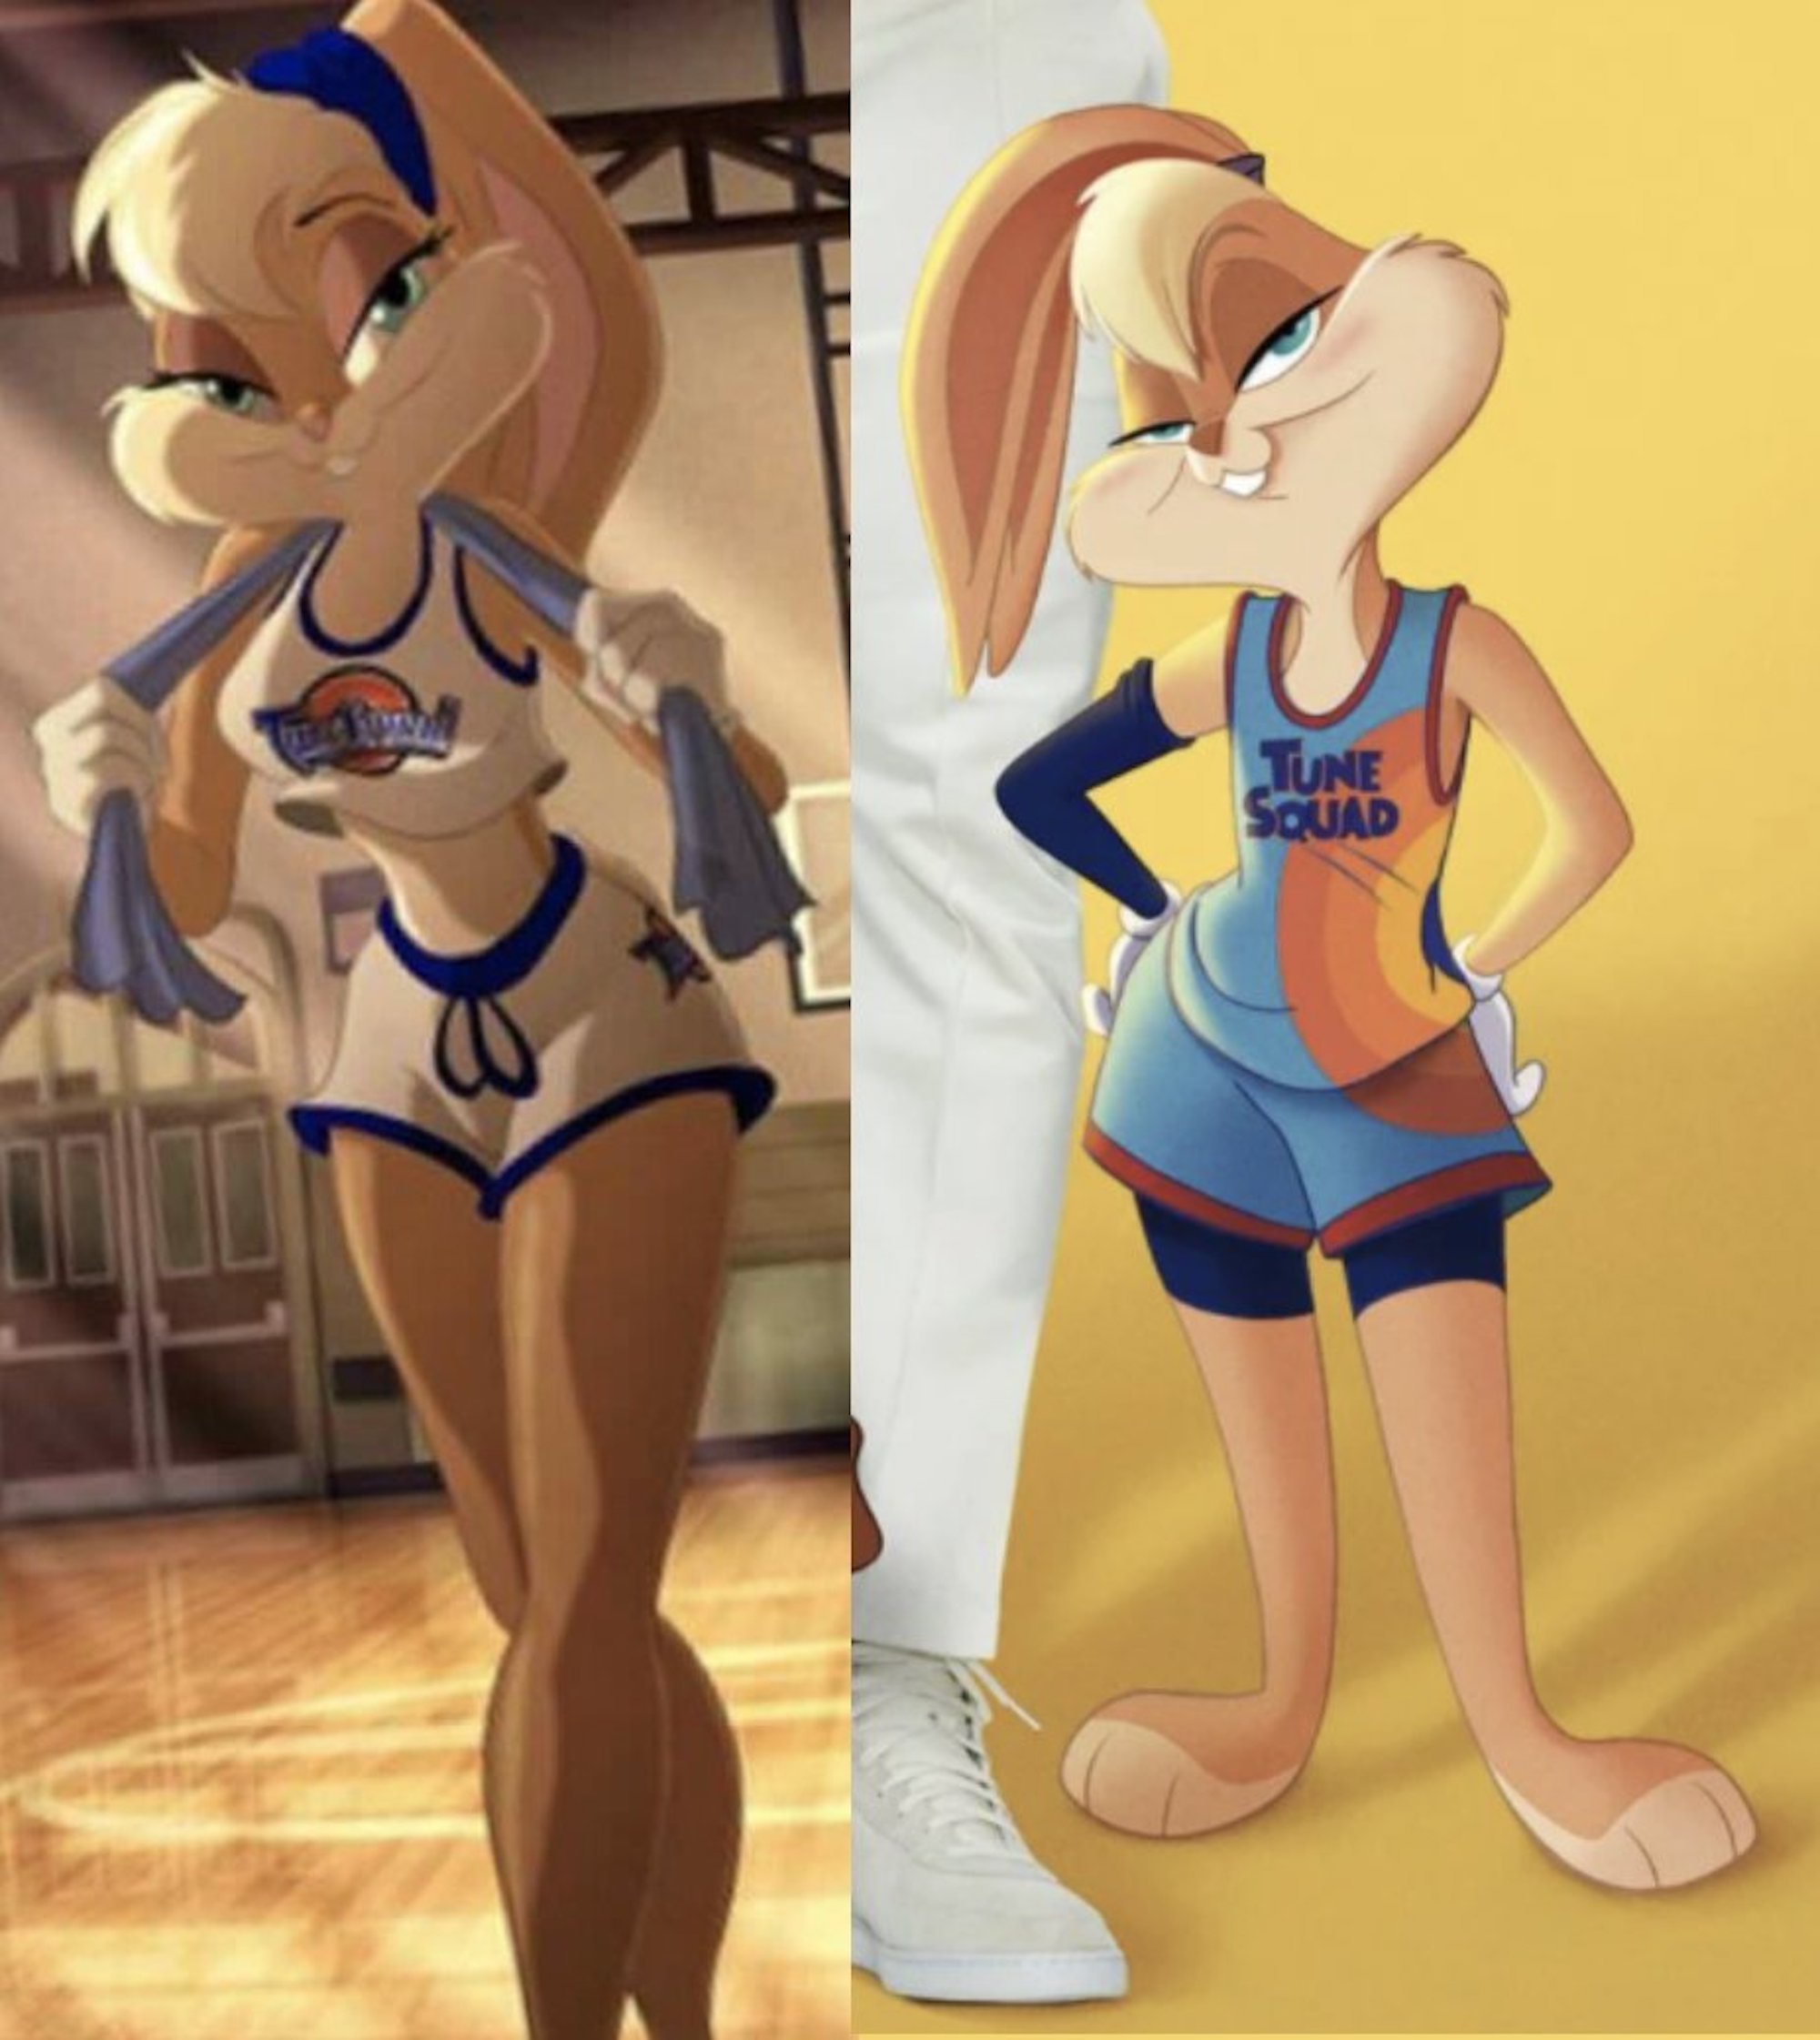 Lola Rabbit Space Jam Porn - People Really Want to Have Sex With Lola Bunny From Space Jam